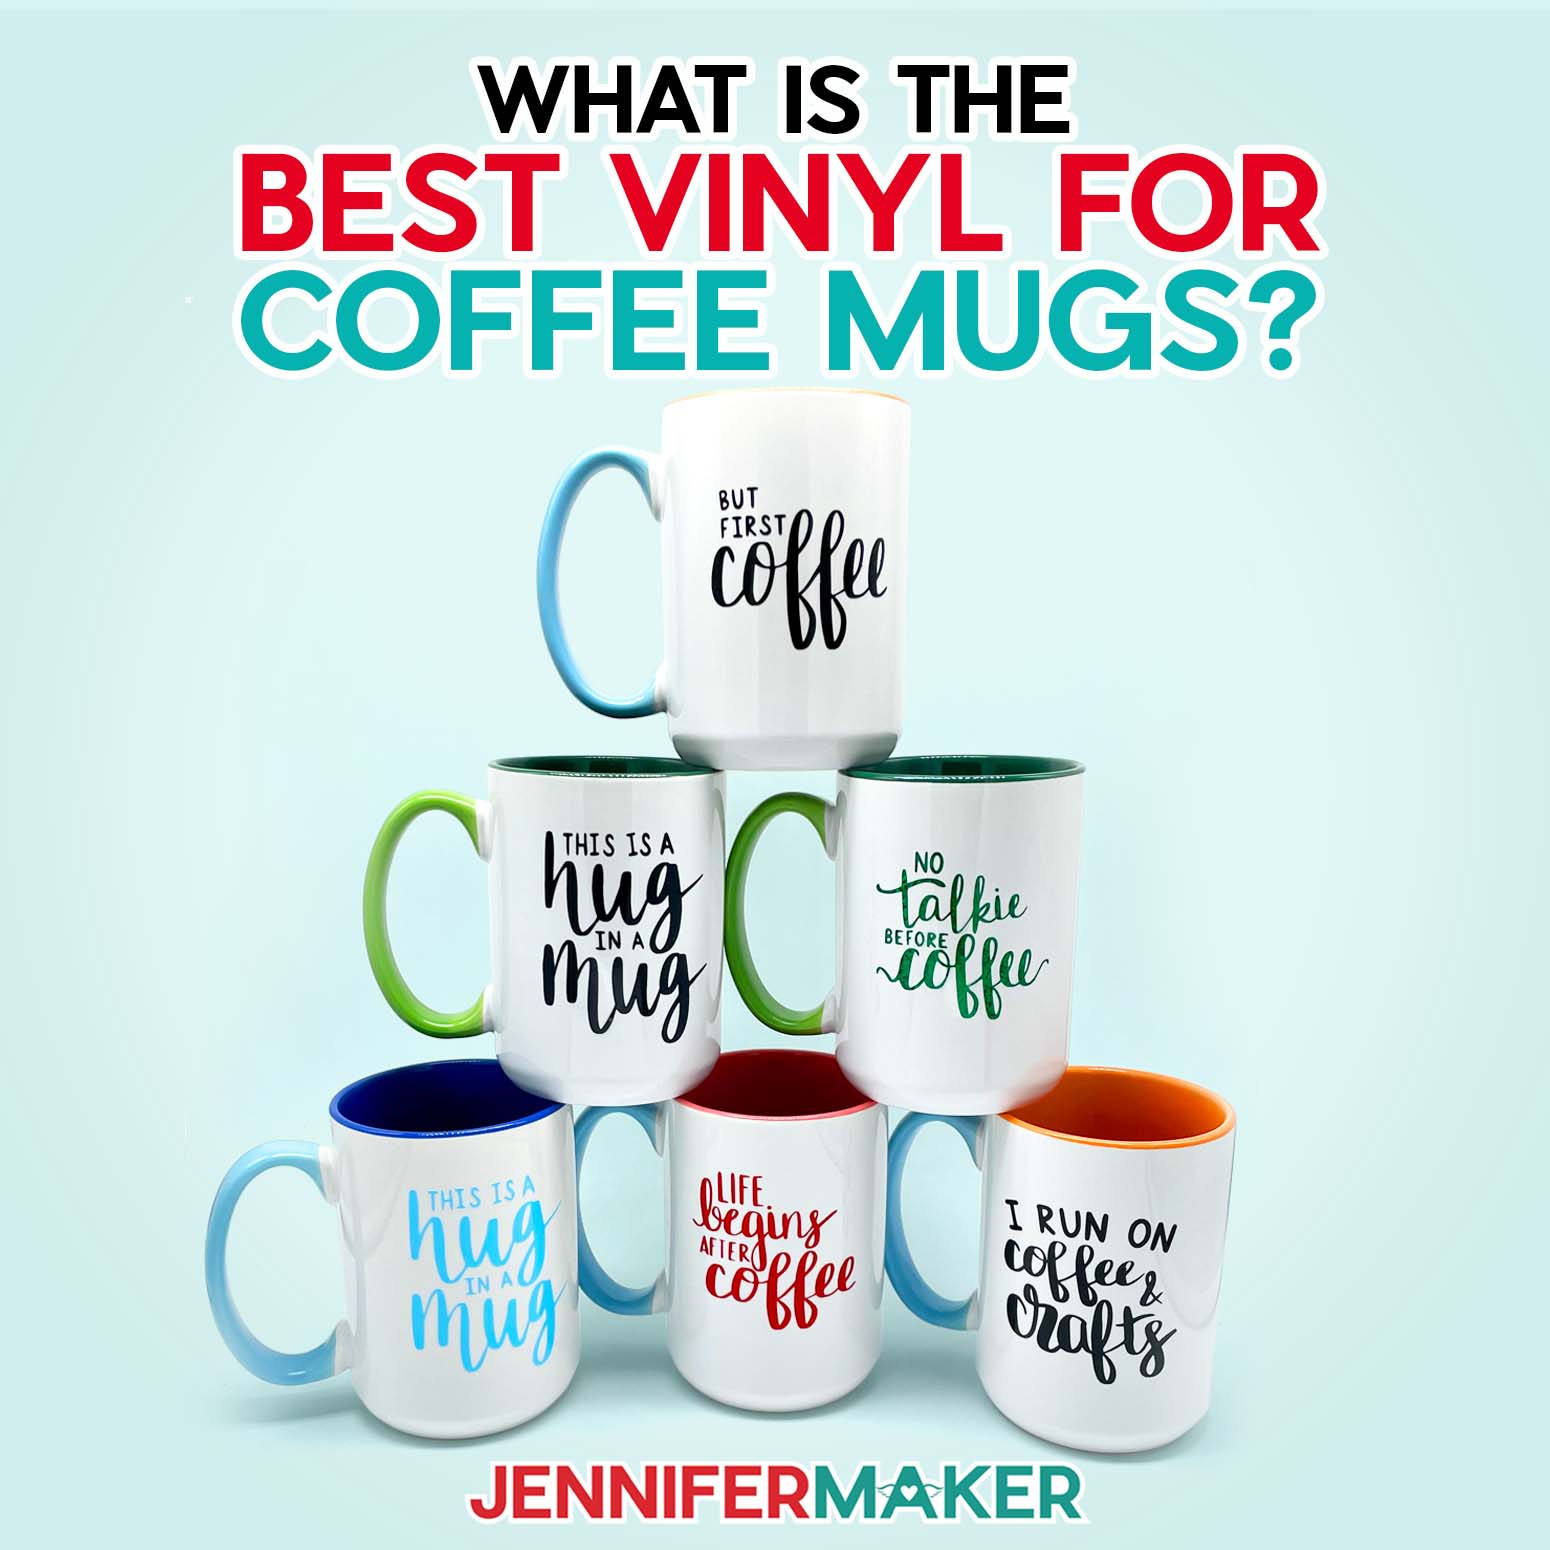 Guide to the BEST Cricut Vinyl for Coffee Mugs!